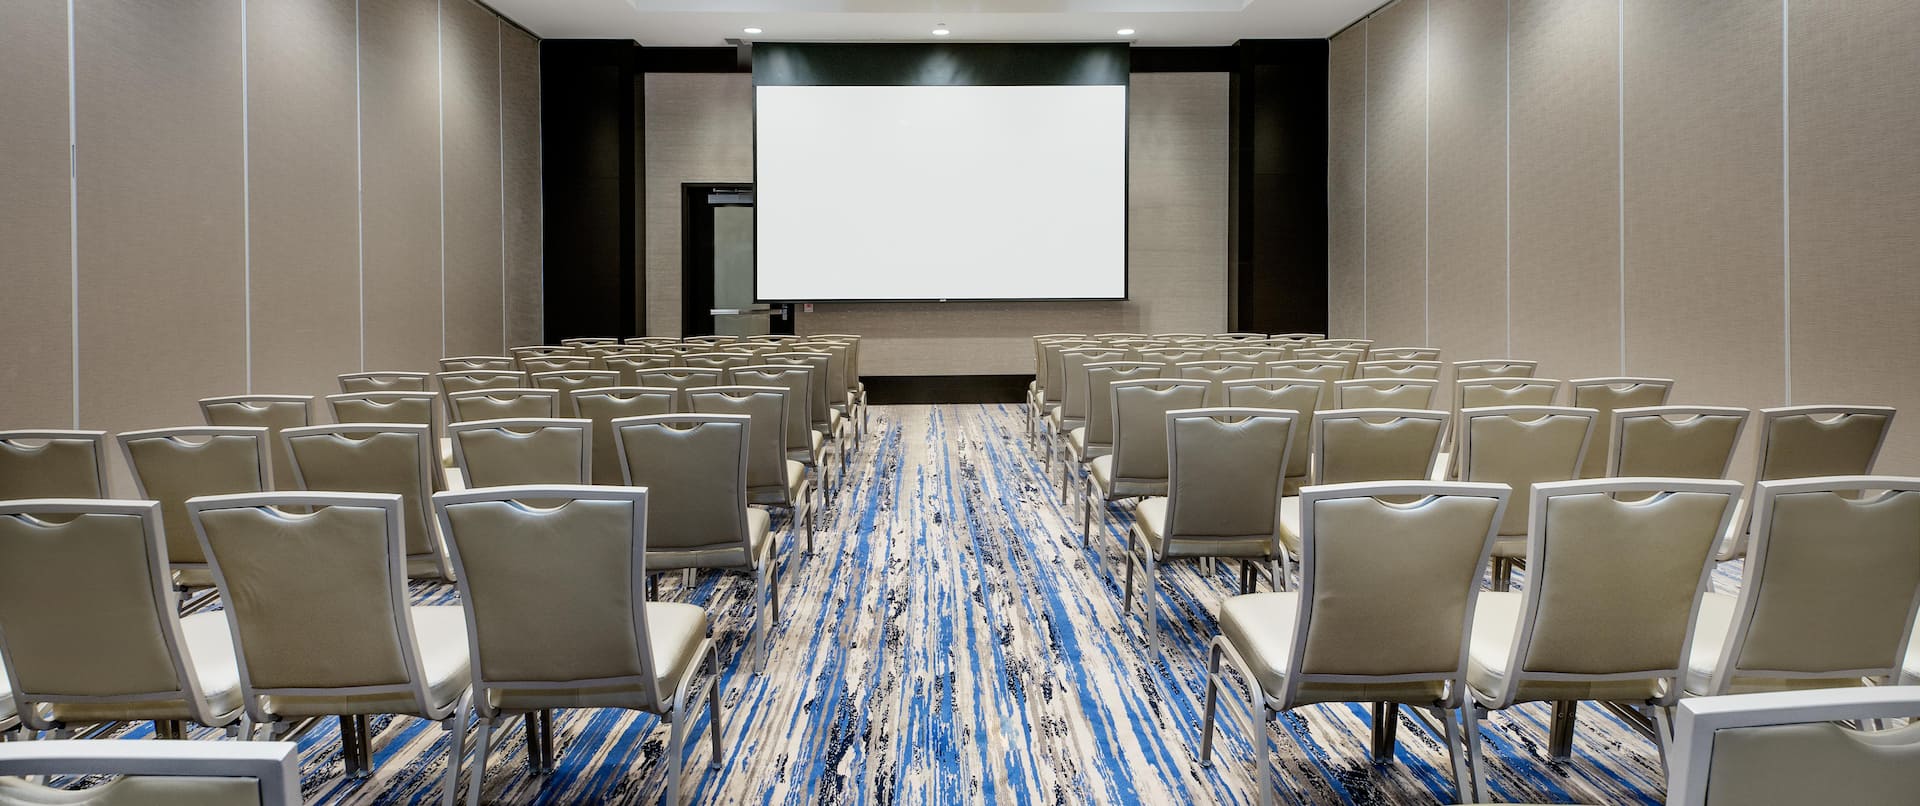 Meeting Room Classroom Setup with Projector Screen